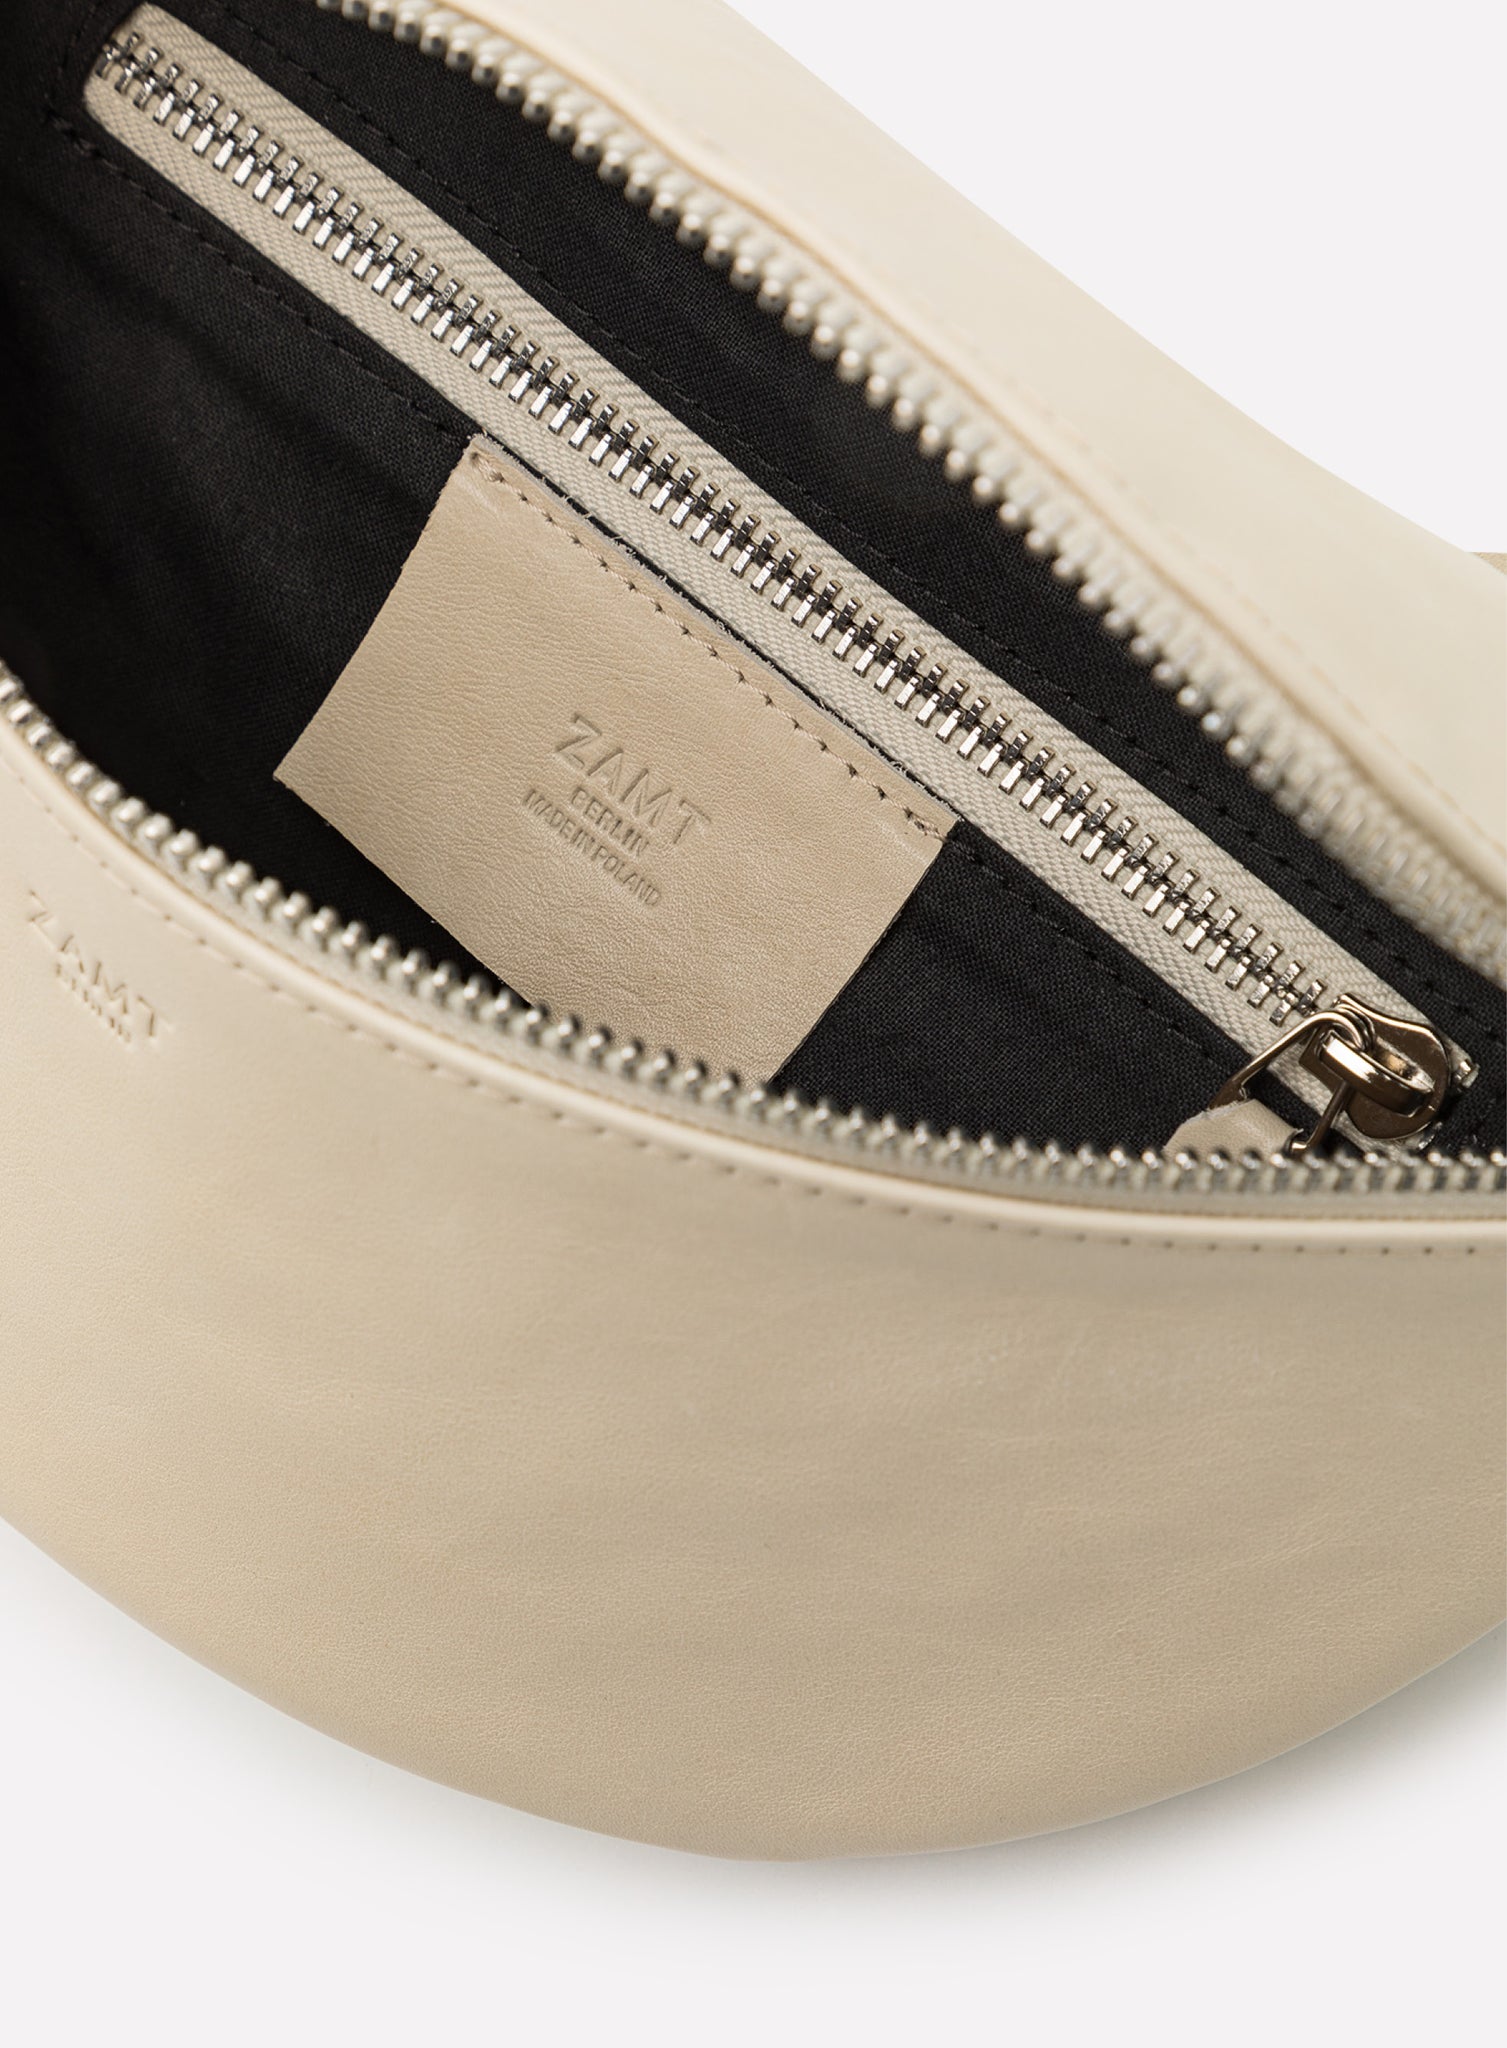 HIP_BAG_CAN_OFFWHITE_Designed_in_Berlin_Made_to_last_Handmade_in_Poland.